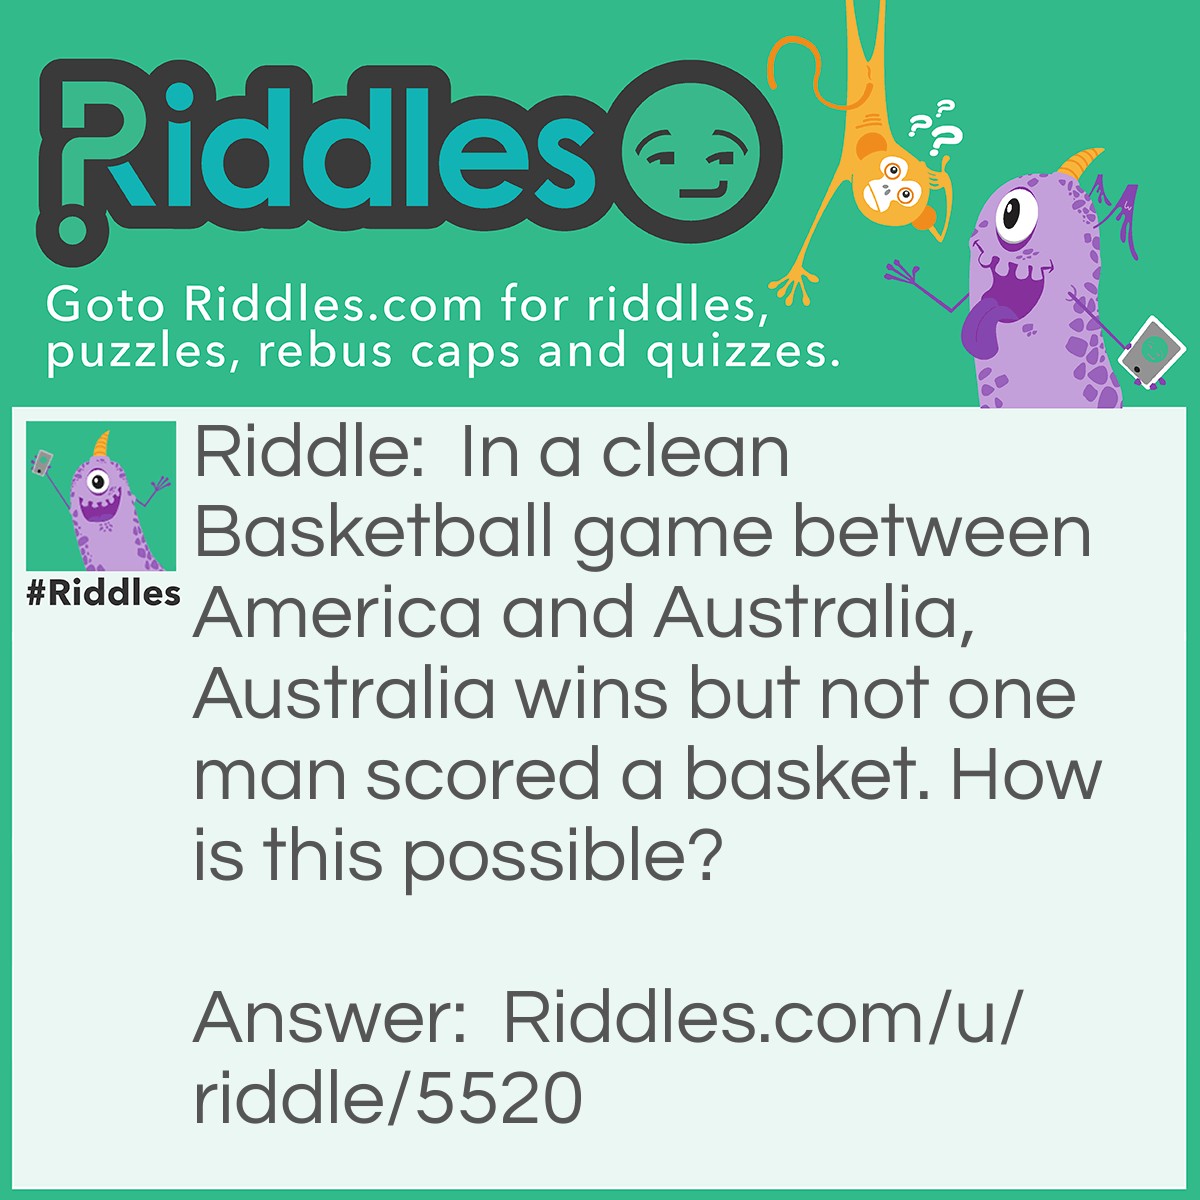 Riddle: In a clean Basketball game between America and Australia, Australia wins but not one man scored a basket. How is this possible? Answer: It was a women's game.